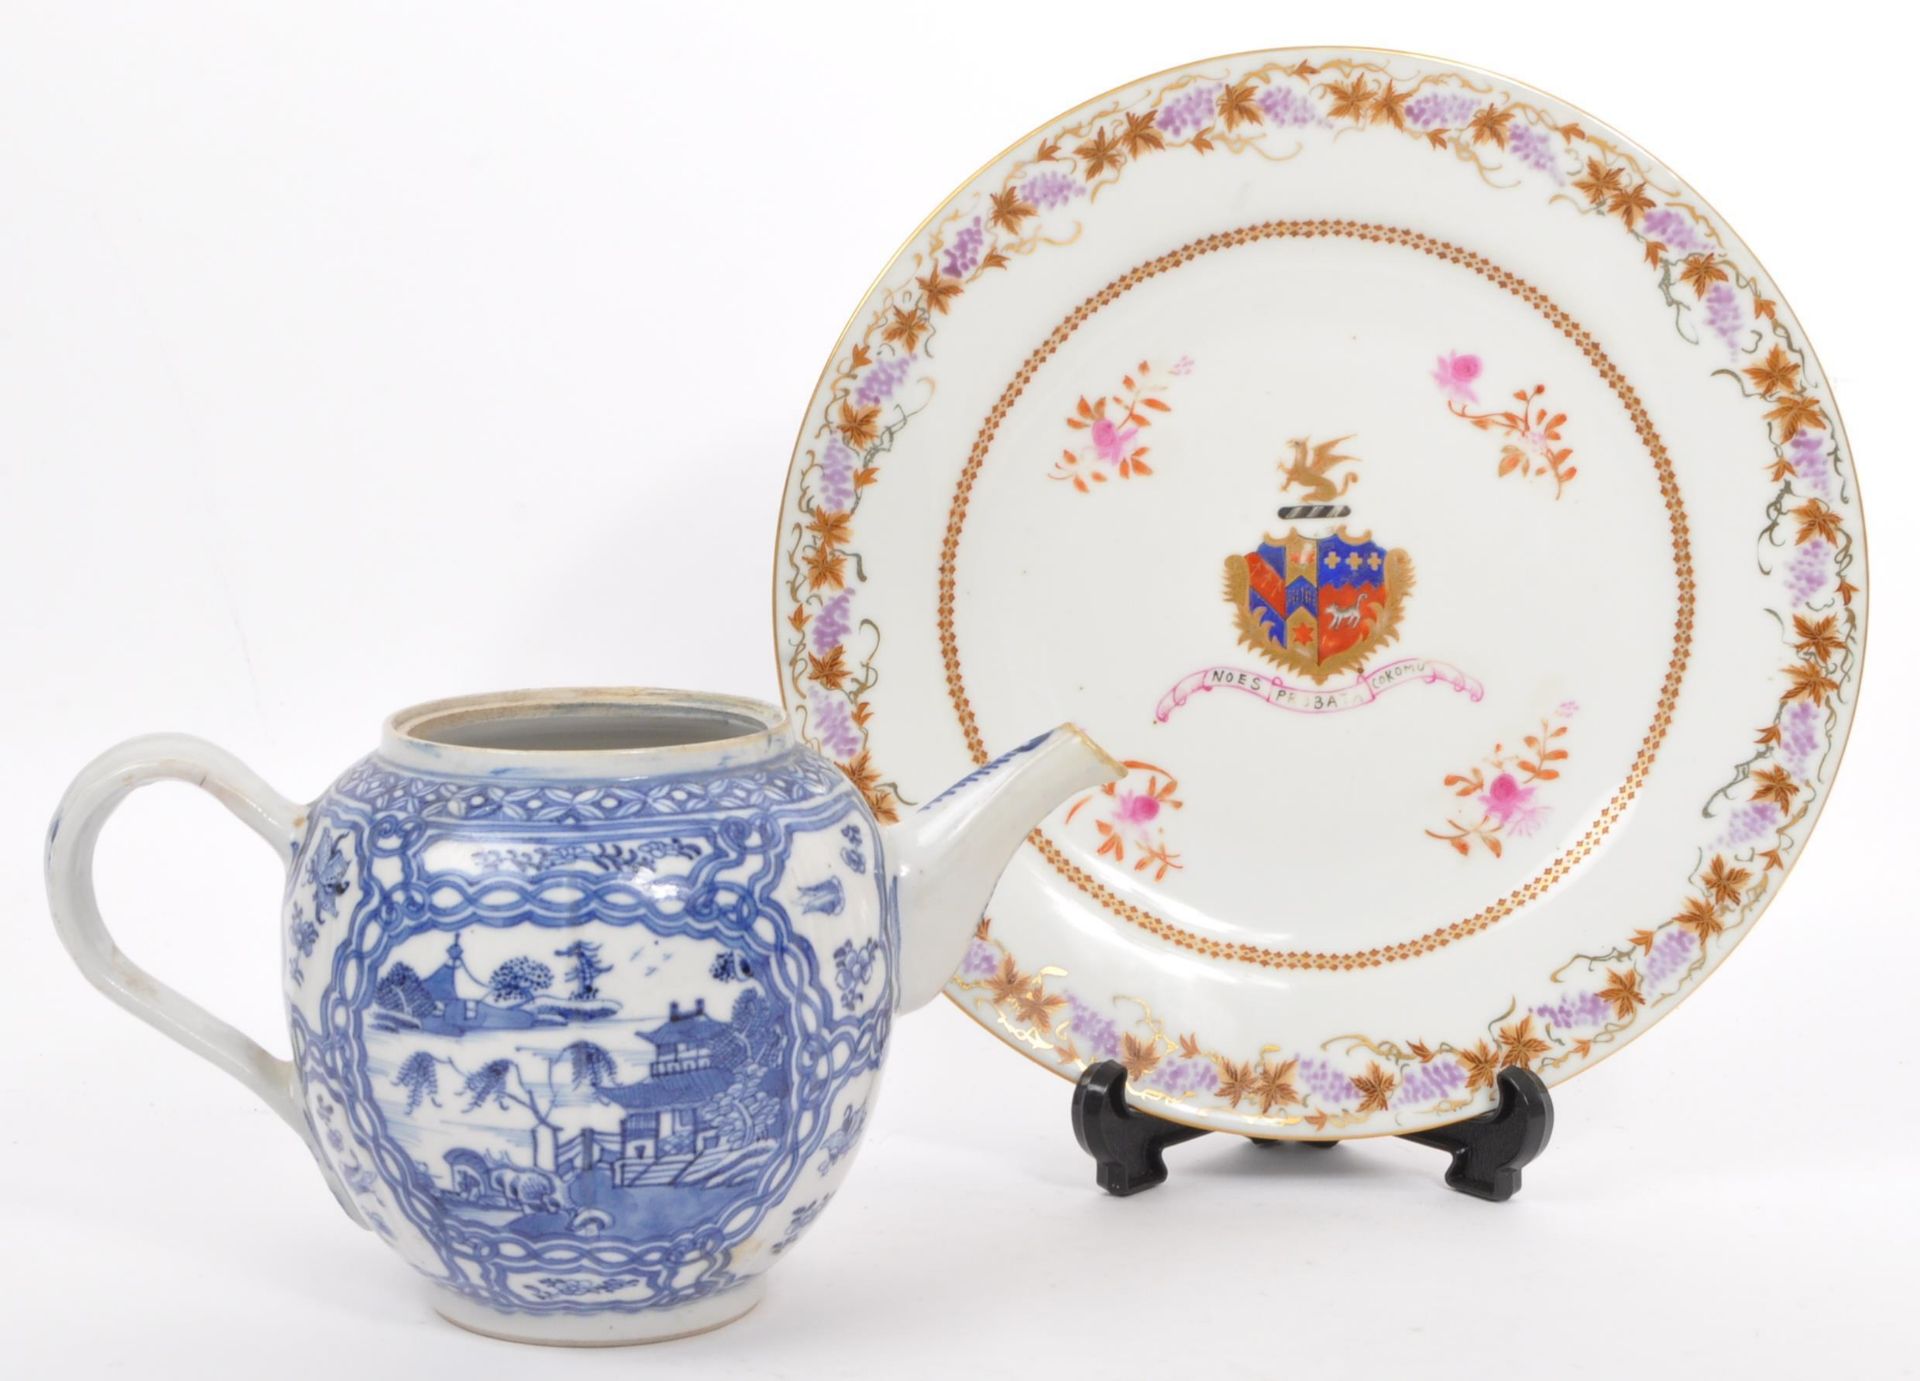 18TH CENTURY CHINESE ORIENTAL TEA POT AND ARMORIAL PLATE